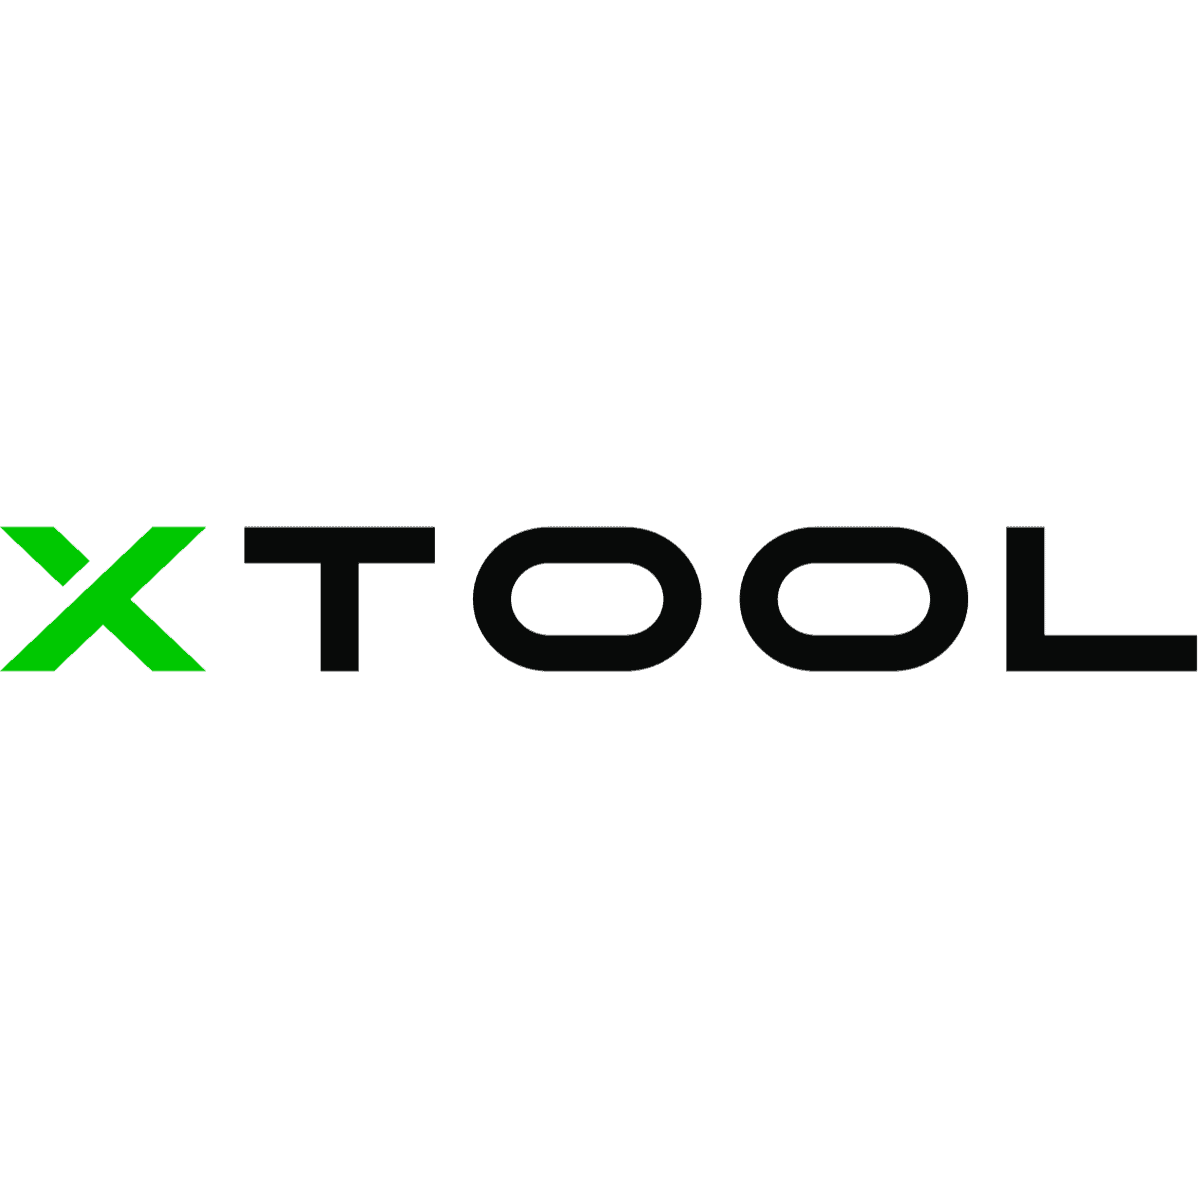 xTool promos and coupon codes